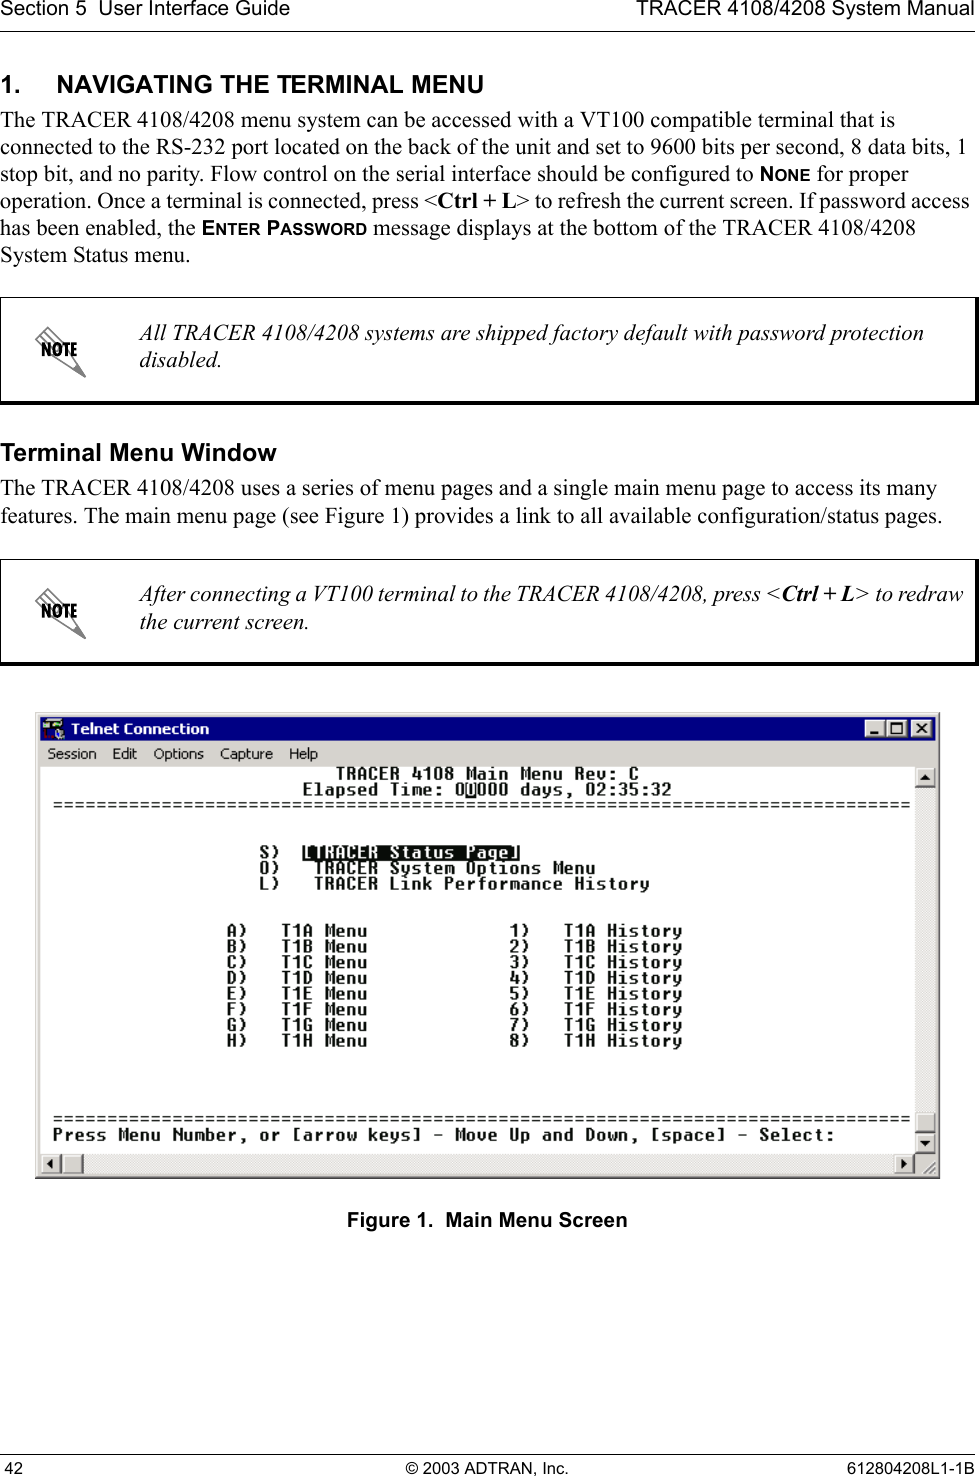 Section 5  User Interface Guide TRACER 4108/4208 System Manual 42 © 2003 ADTRAN, Inc. 612804208L1-1B1. NAVIGATING THE TERMINAL MENUThe TRACER 4108/4208 menu system can be accessed with a VT100 compatible terminal that is connected to the RS-232 port located on the back of the unit and set to 9600 bits per second, 8 data bits, 1 stop bit, and no parity. Flow control on the serial interface should be configured to NONE for proper operation. Once a terminal is connected, press &lt;Ctrl + L&gt; to refresh the current screen. If password access has been enabled, the ENTER PASSWORD message displays at the bottom of the TRACER 4108/4208 System Status menu. Terminal Menu WindowThe TRACER 4108/4208 uses a series of menu pages and a single main menu page to access its many features. The main menu page (see Figure 1) provides a link to all available configuration/status pages.Figure 1.  Main Menu ScreenAll TRACER 4108/4208 systems are shipped factory default with password protection disabled.After connecting a VT100 terminal to the TRACER 4108/4208, press &lt;Ctrl + L&gt; to redraw the current screen.